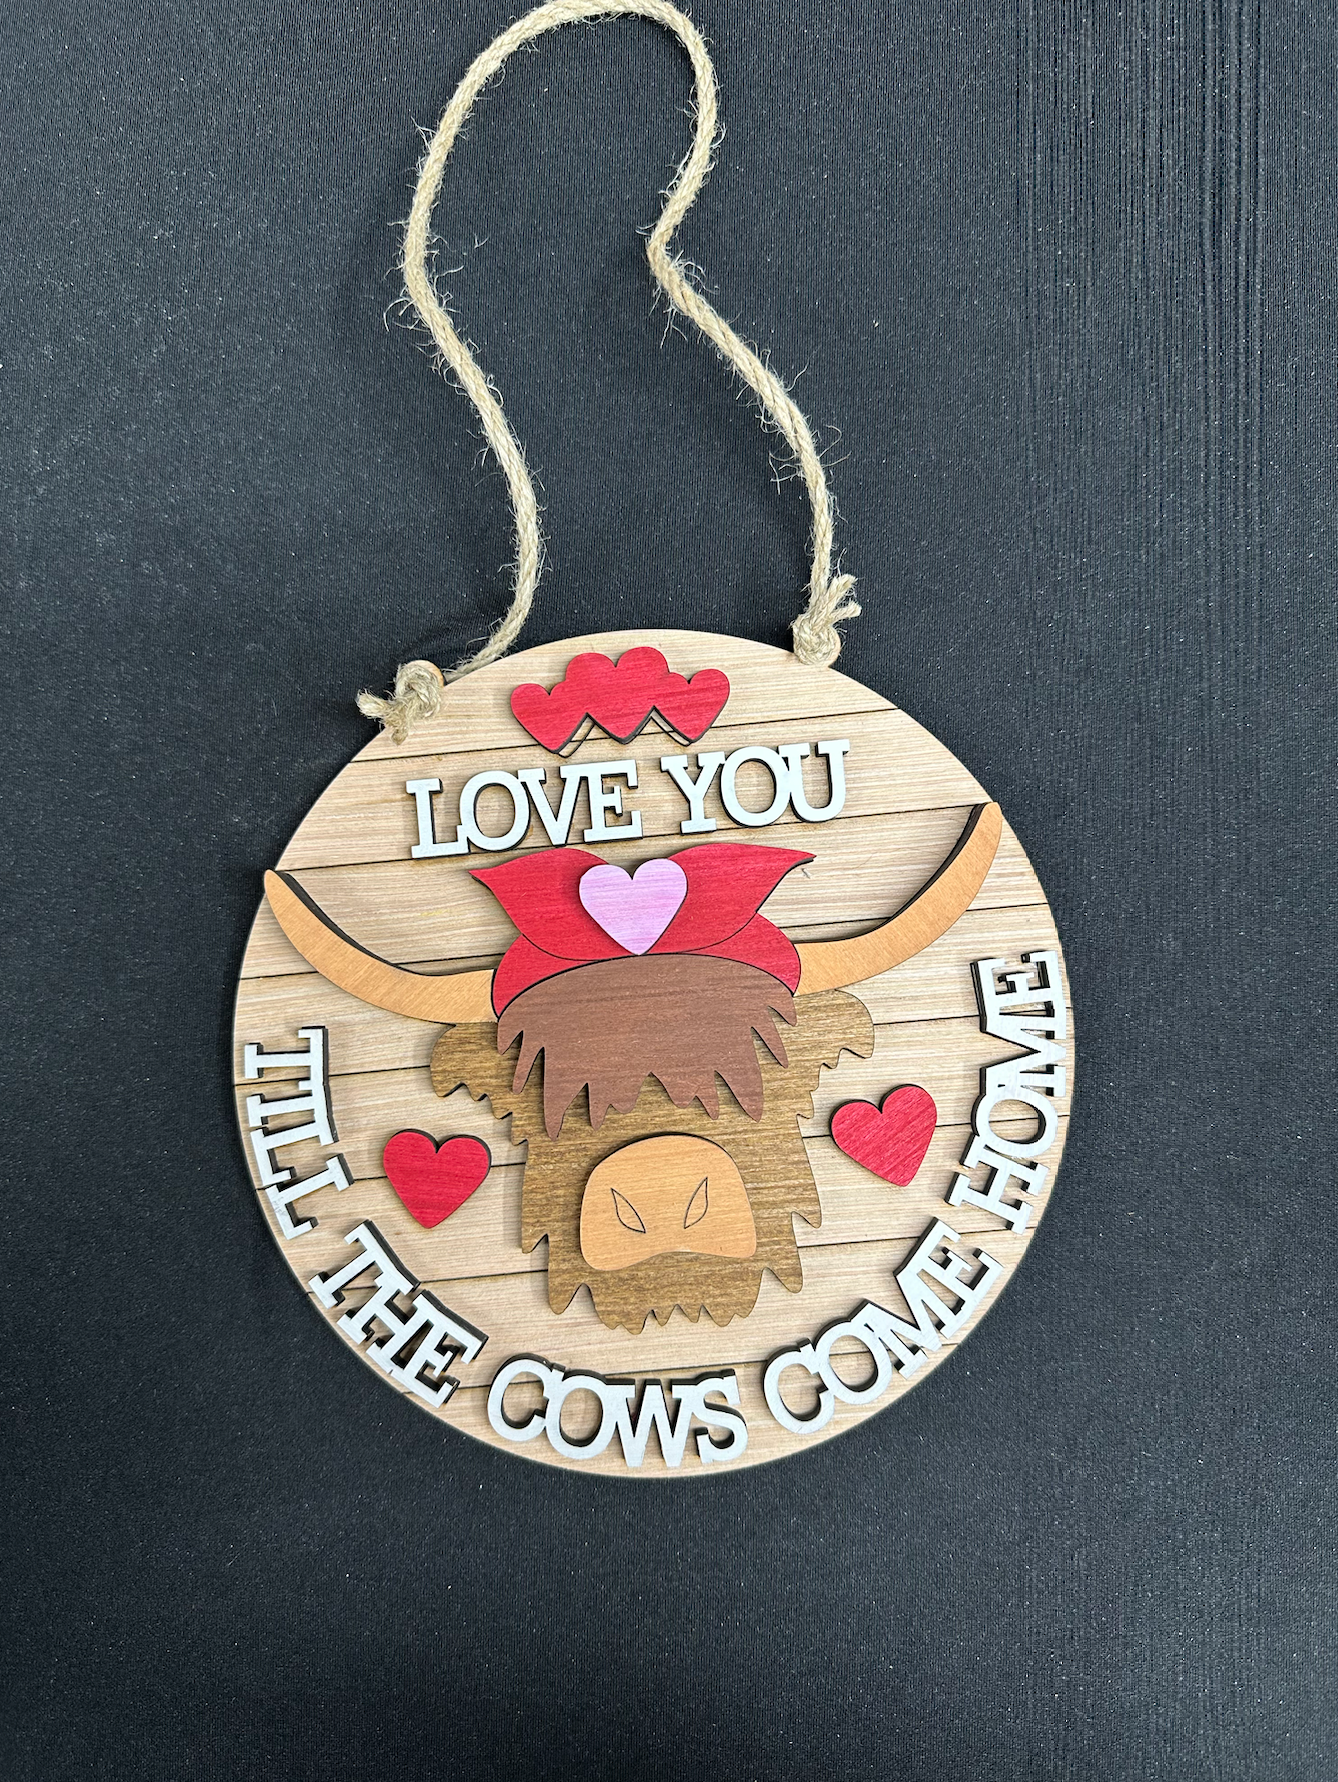 DIY 3d Highland Cow Door Hanger Wood Art Kit - Love You Till the Cows Come Home wood sign